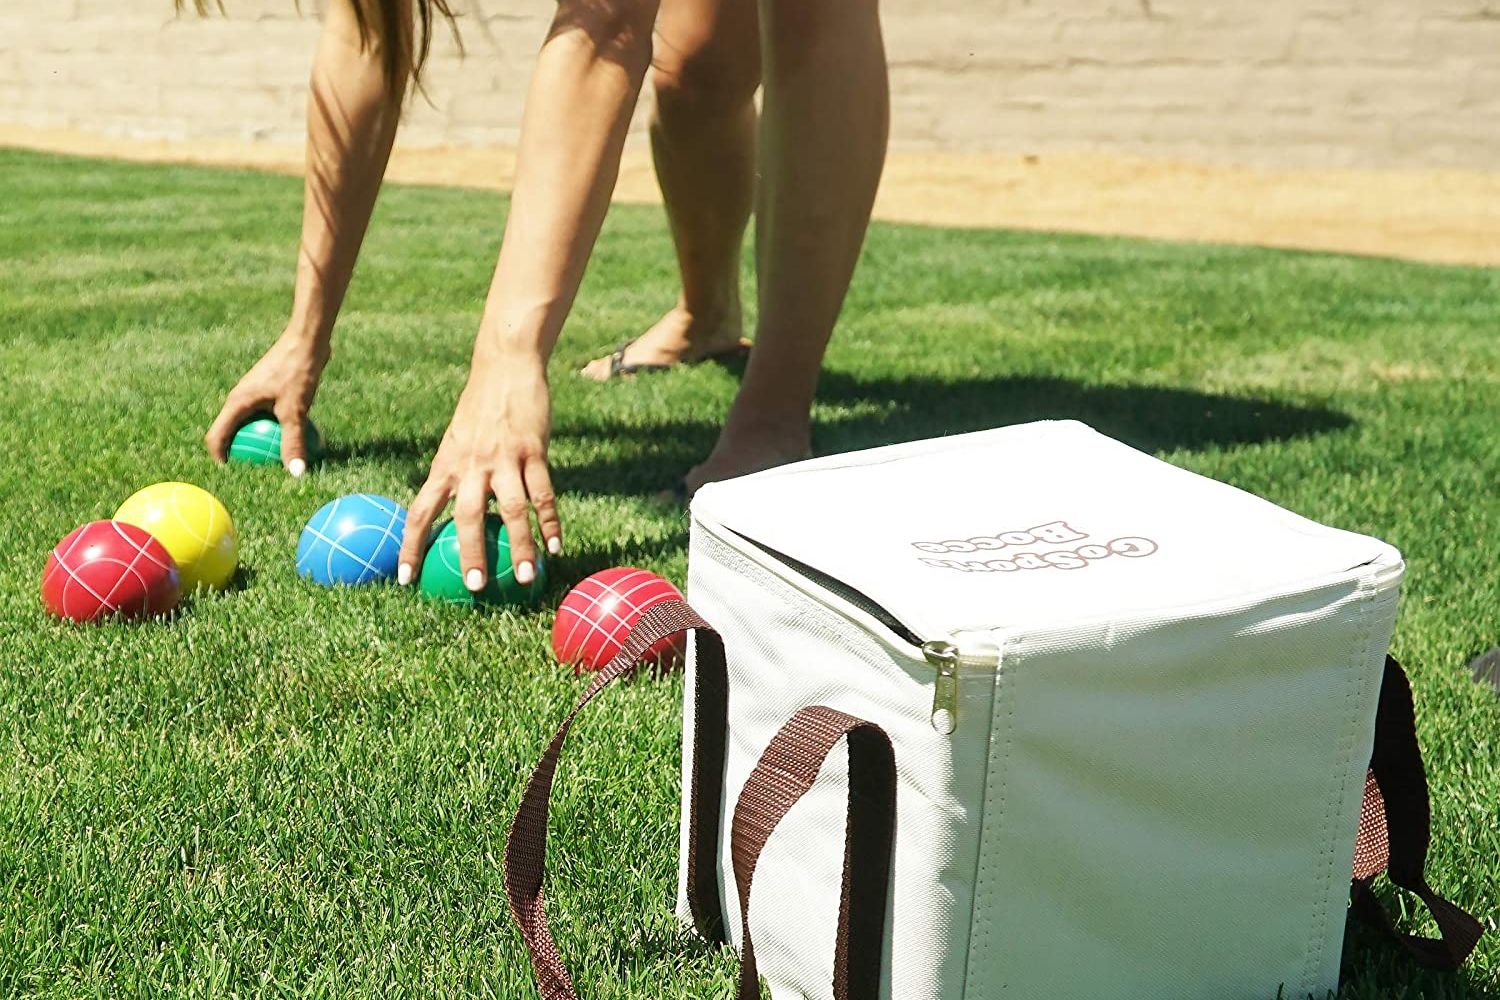 Everything You Need for a Backyard Cookout Options: GoSports Backyard Bocce Set